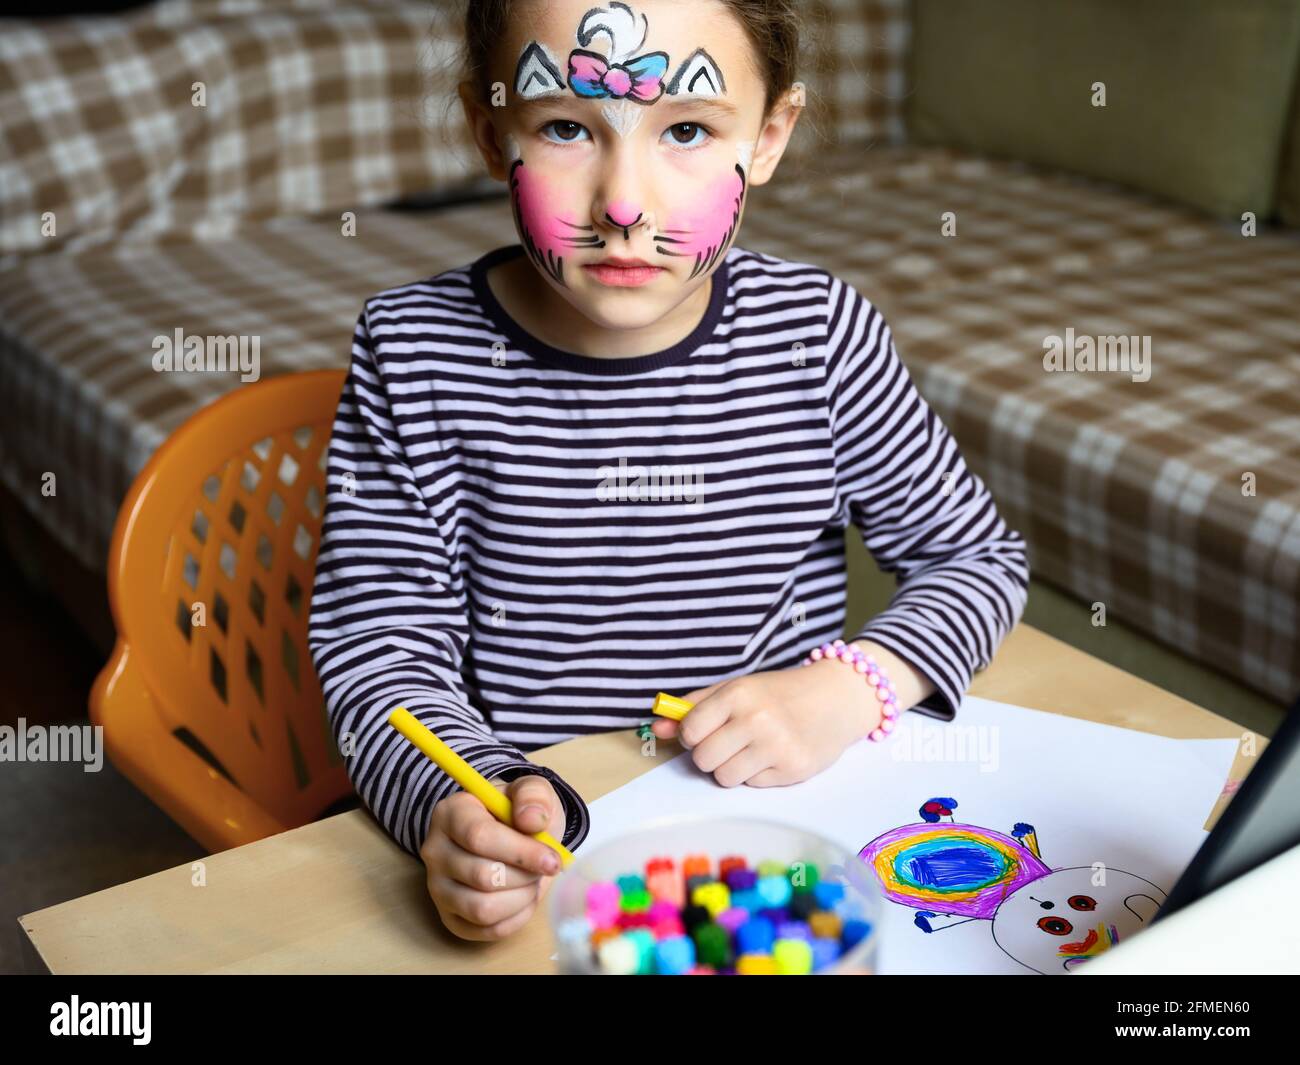 Kid drawing with felt-tip pens indoor, little girl with painted mask on face studying at home. Cute child learns to draw at table in room. Portrait of Stock Photo